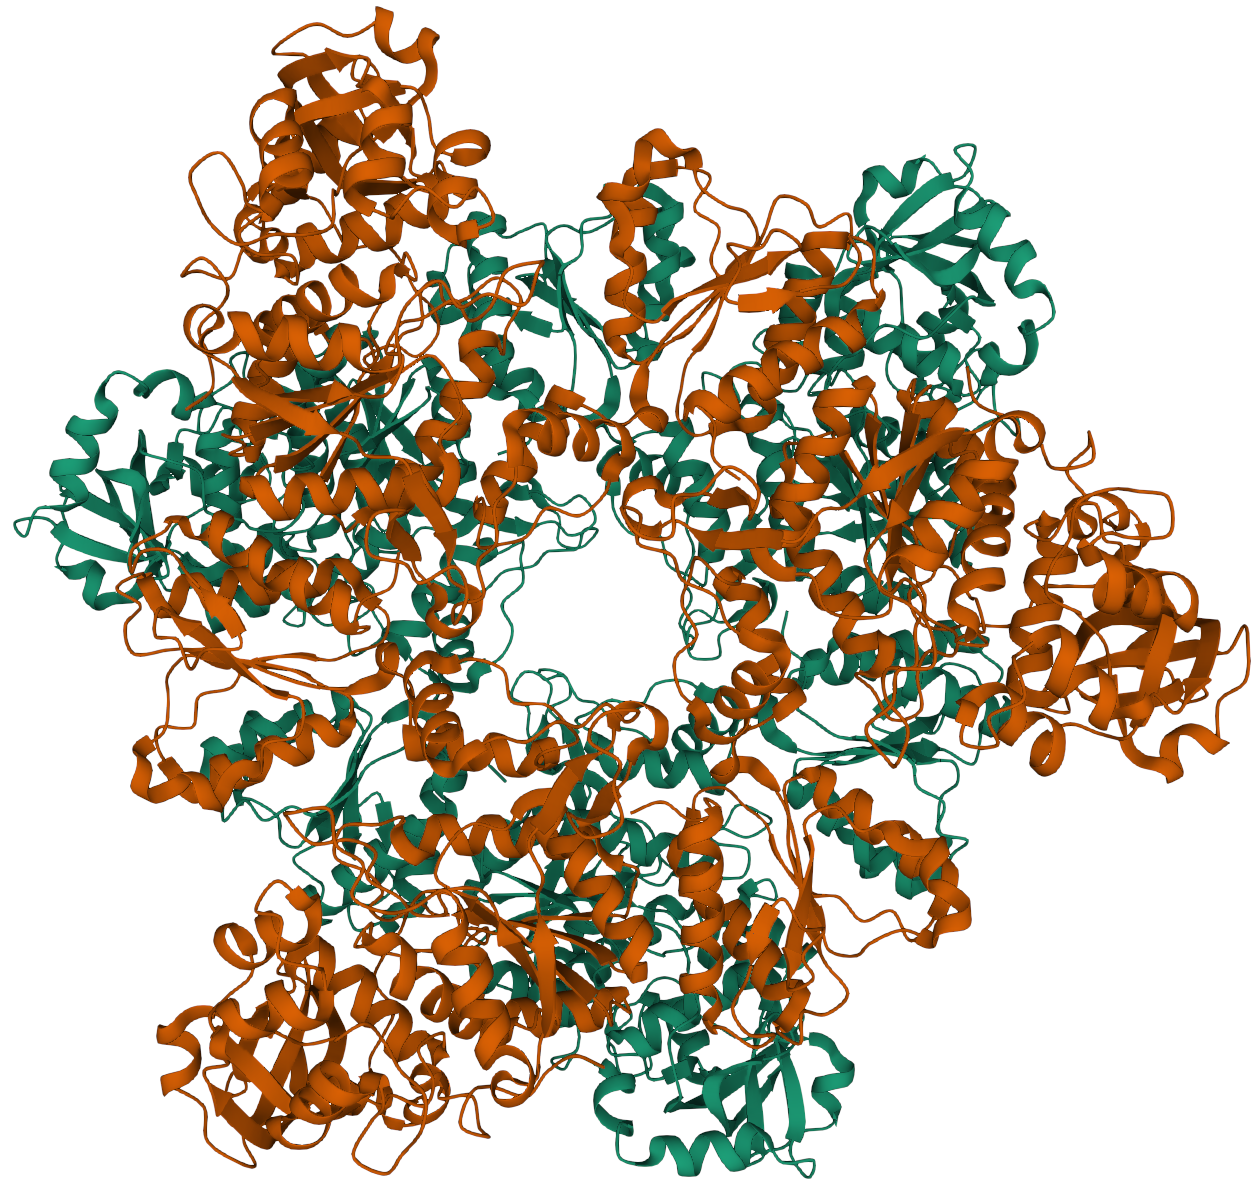 Abstraction of the quaternary structure of an enzyme